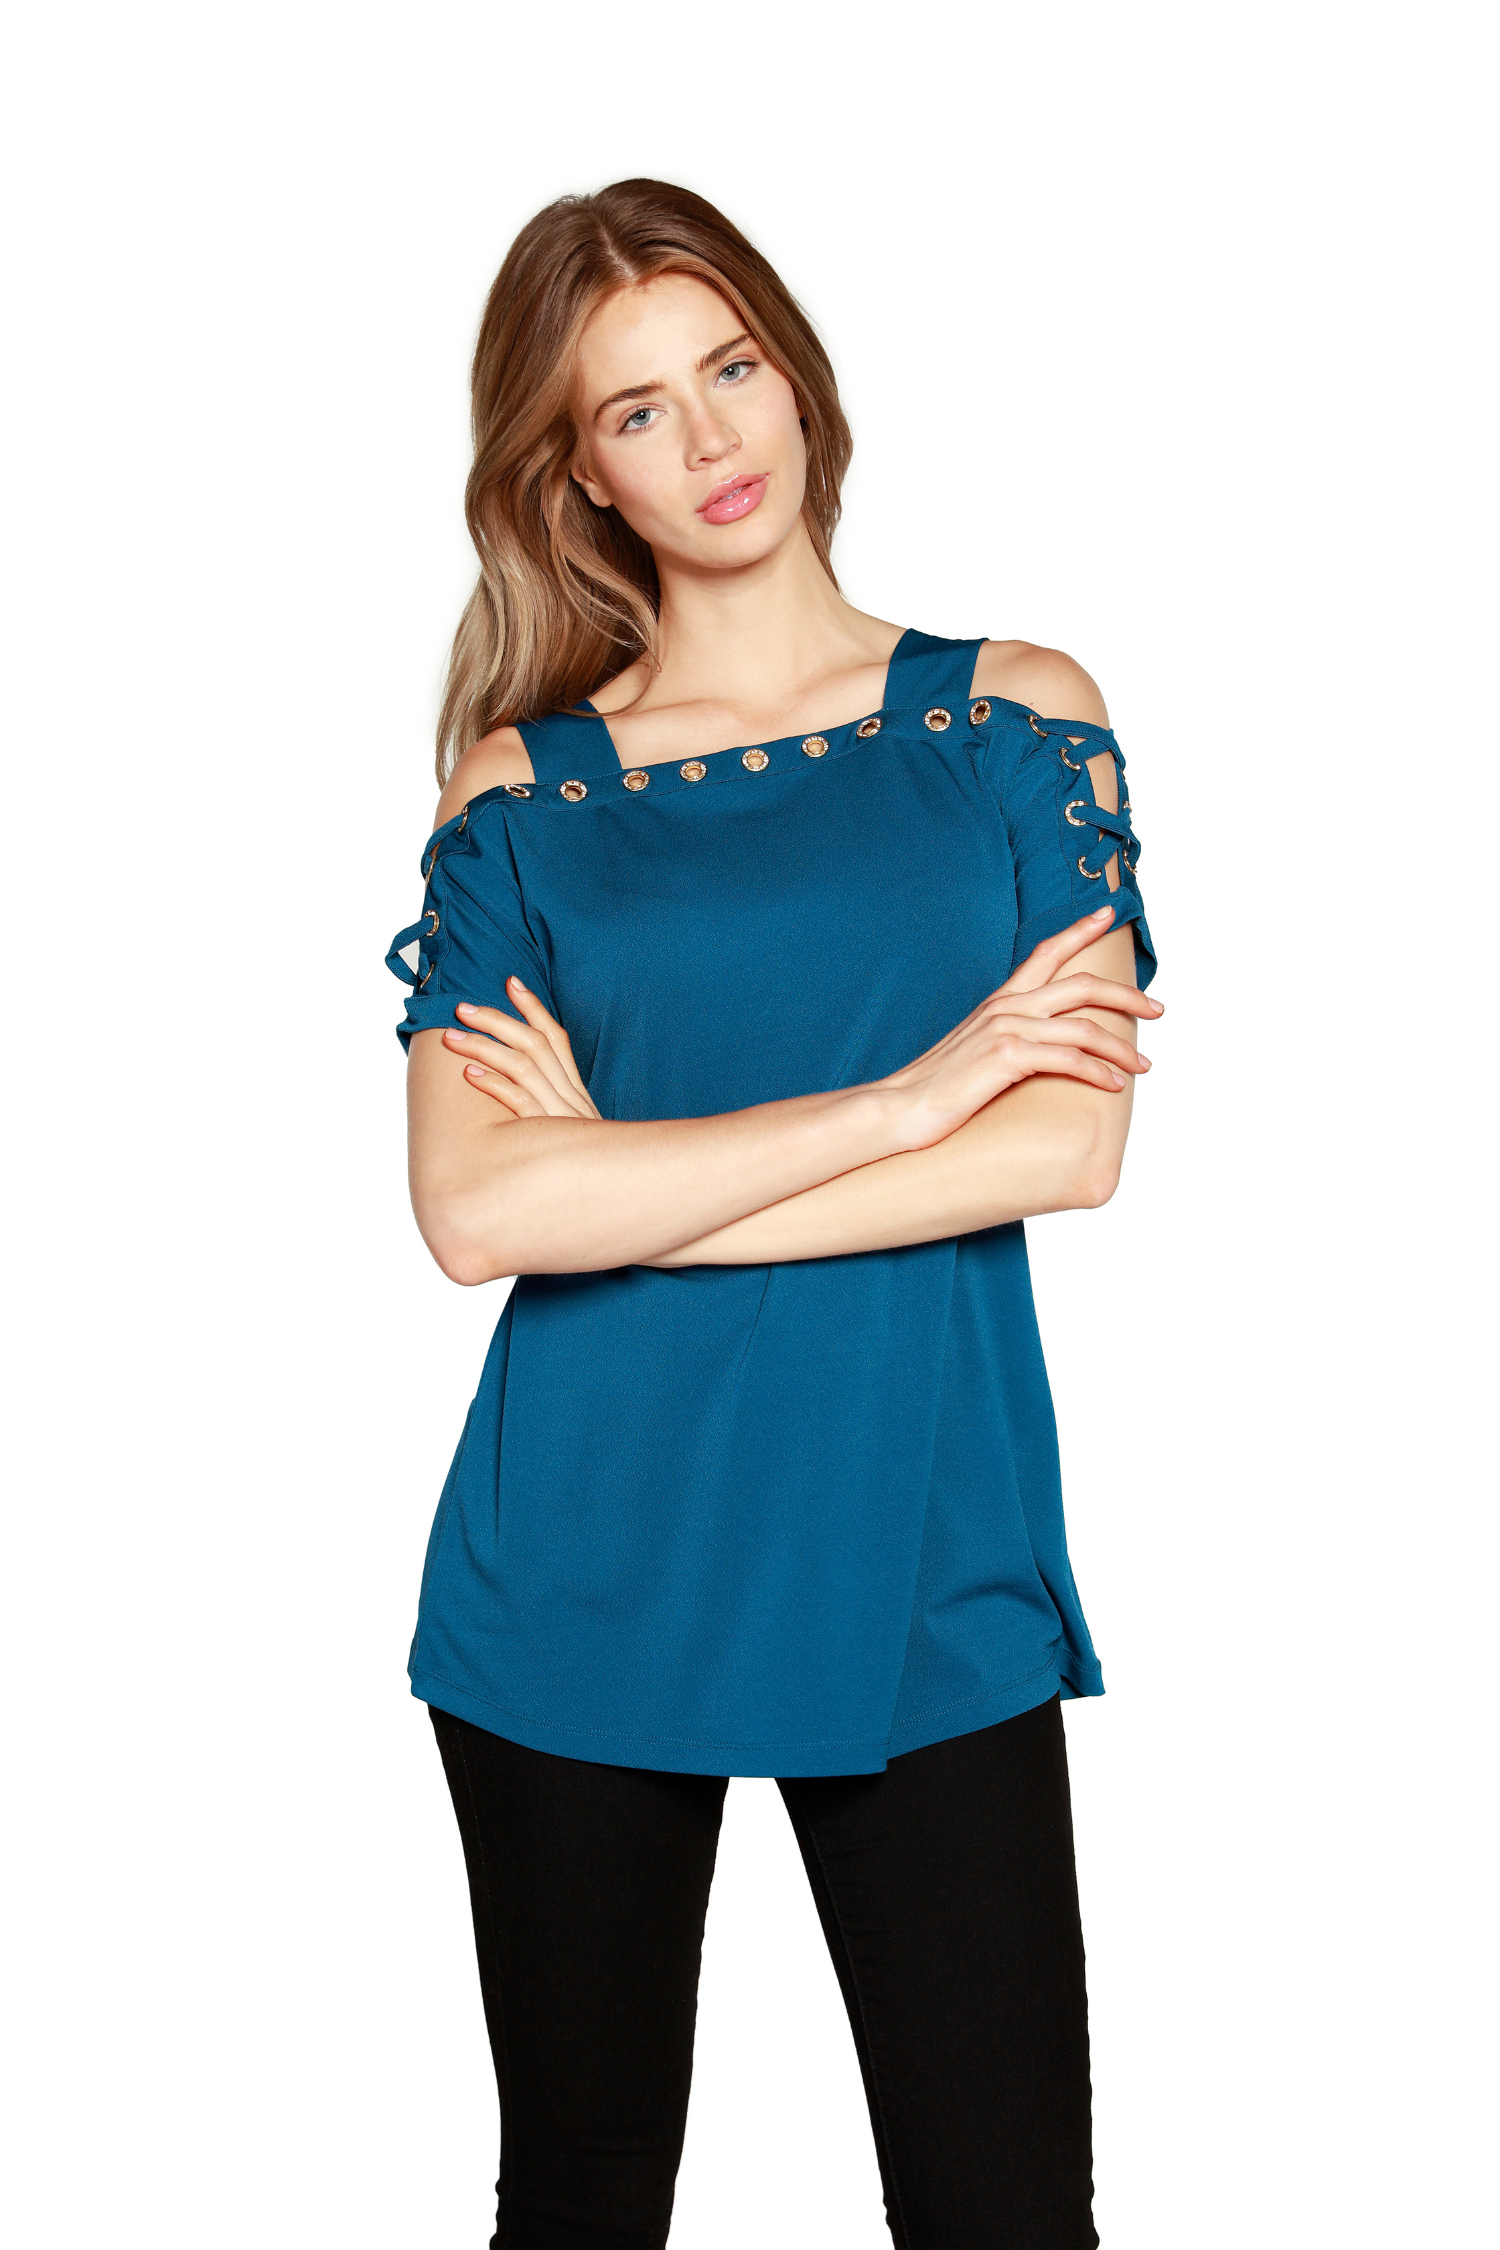 Women's Short Sleeve Cold Shoulder Top with Gold Rhinestone Lace Up Detail